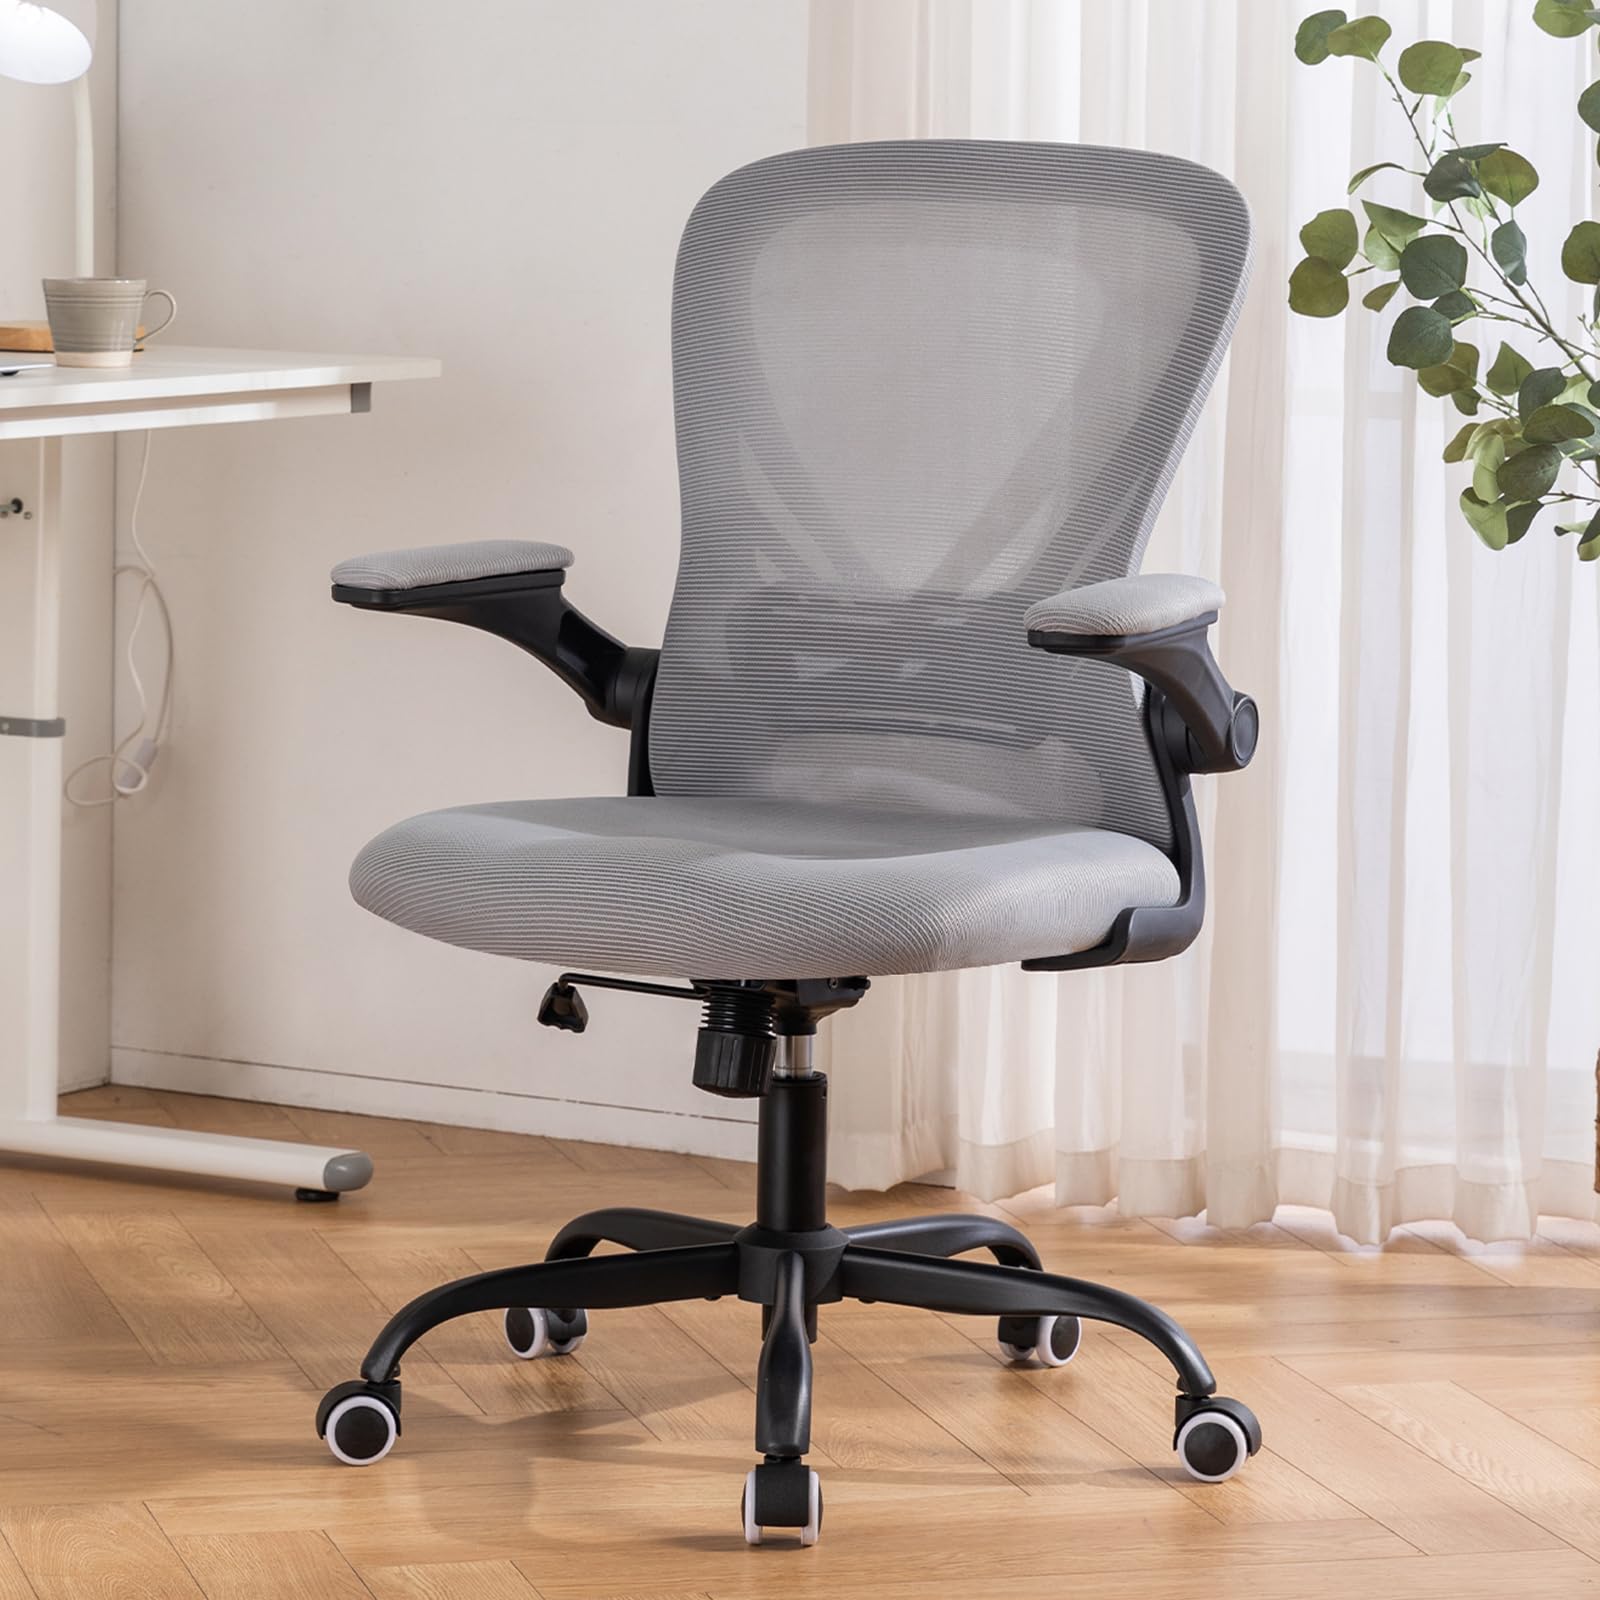 Hramk Office Chair Mid Back Swivel Desk Chair with Flip-up Arms Breathable Mesh Computer Chair Lumbar Support Task Chair wi